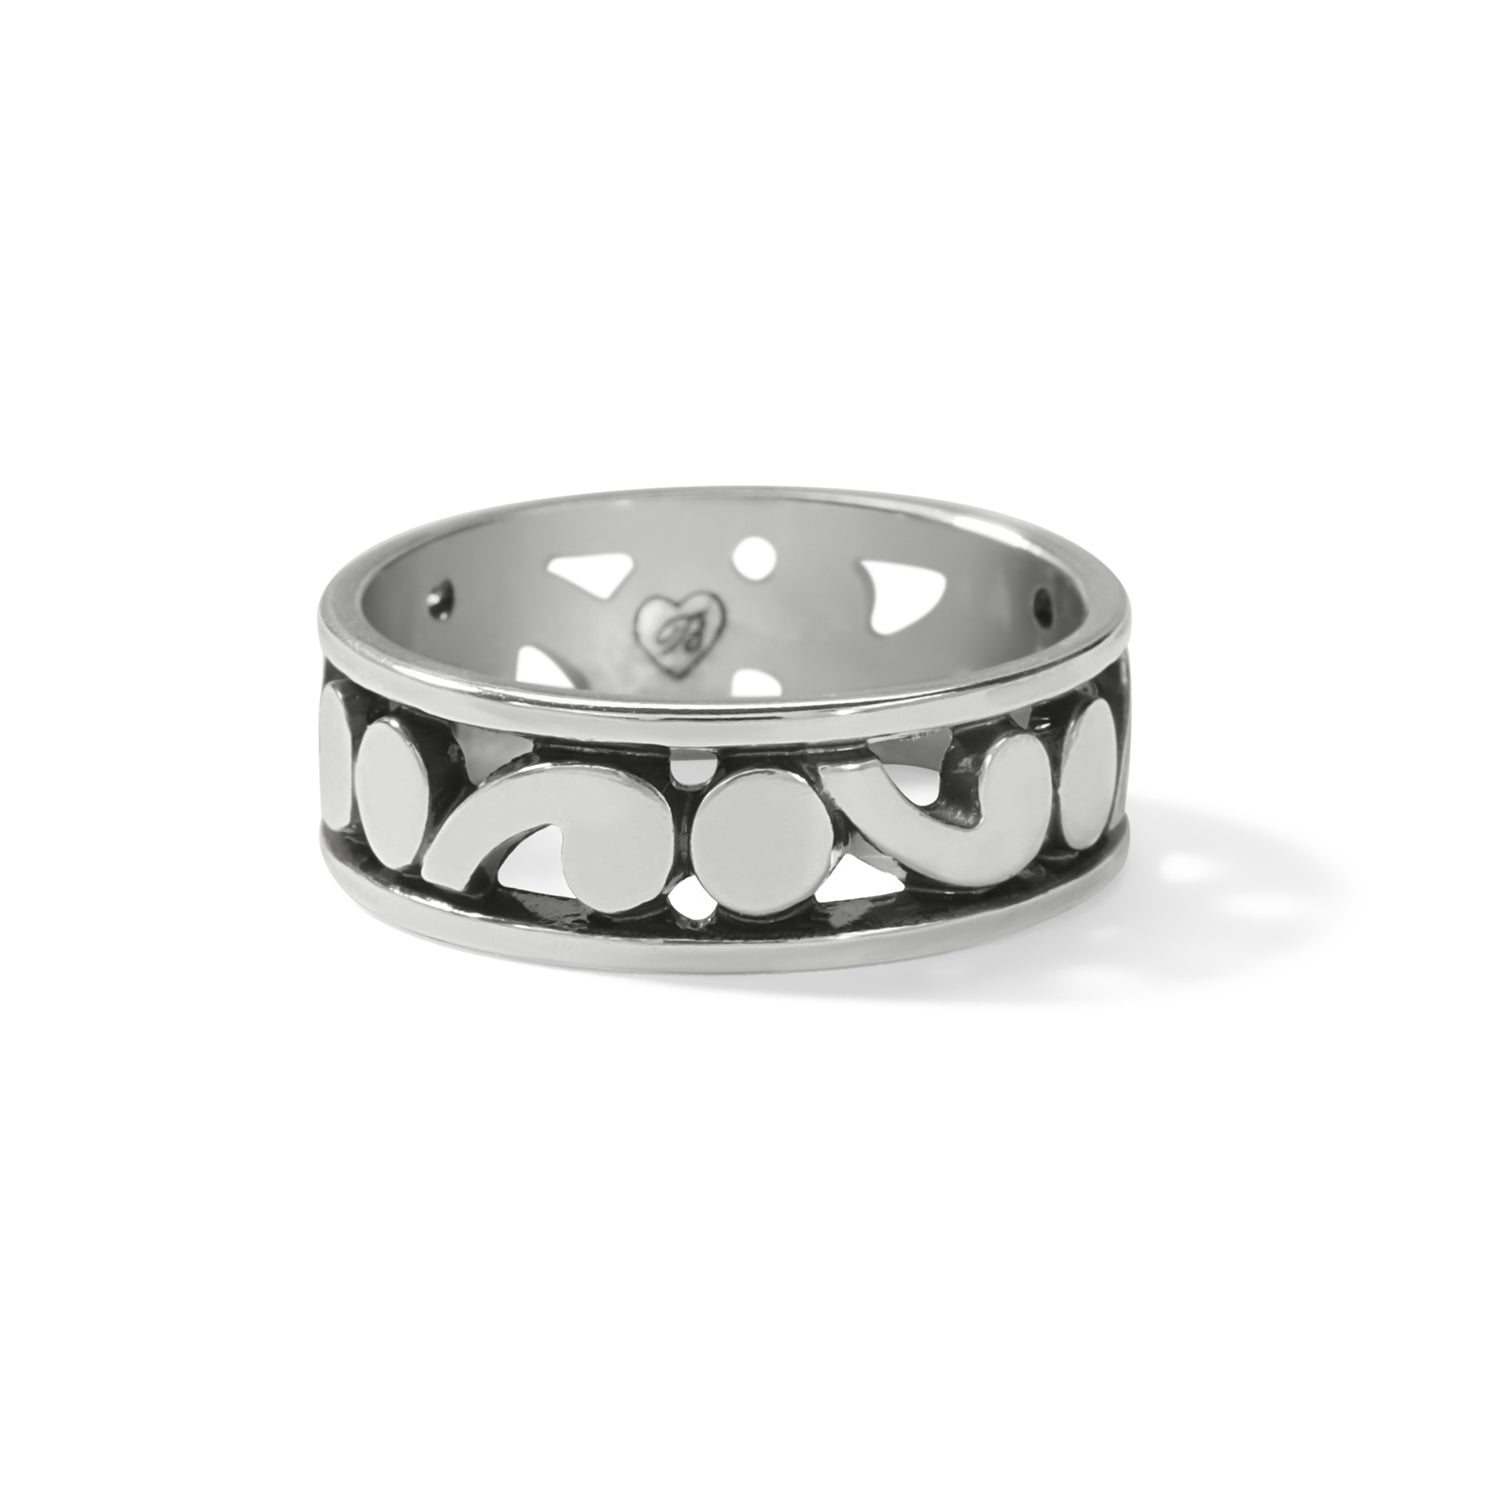 Contempo Band Ring - Size 6 Front View